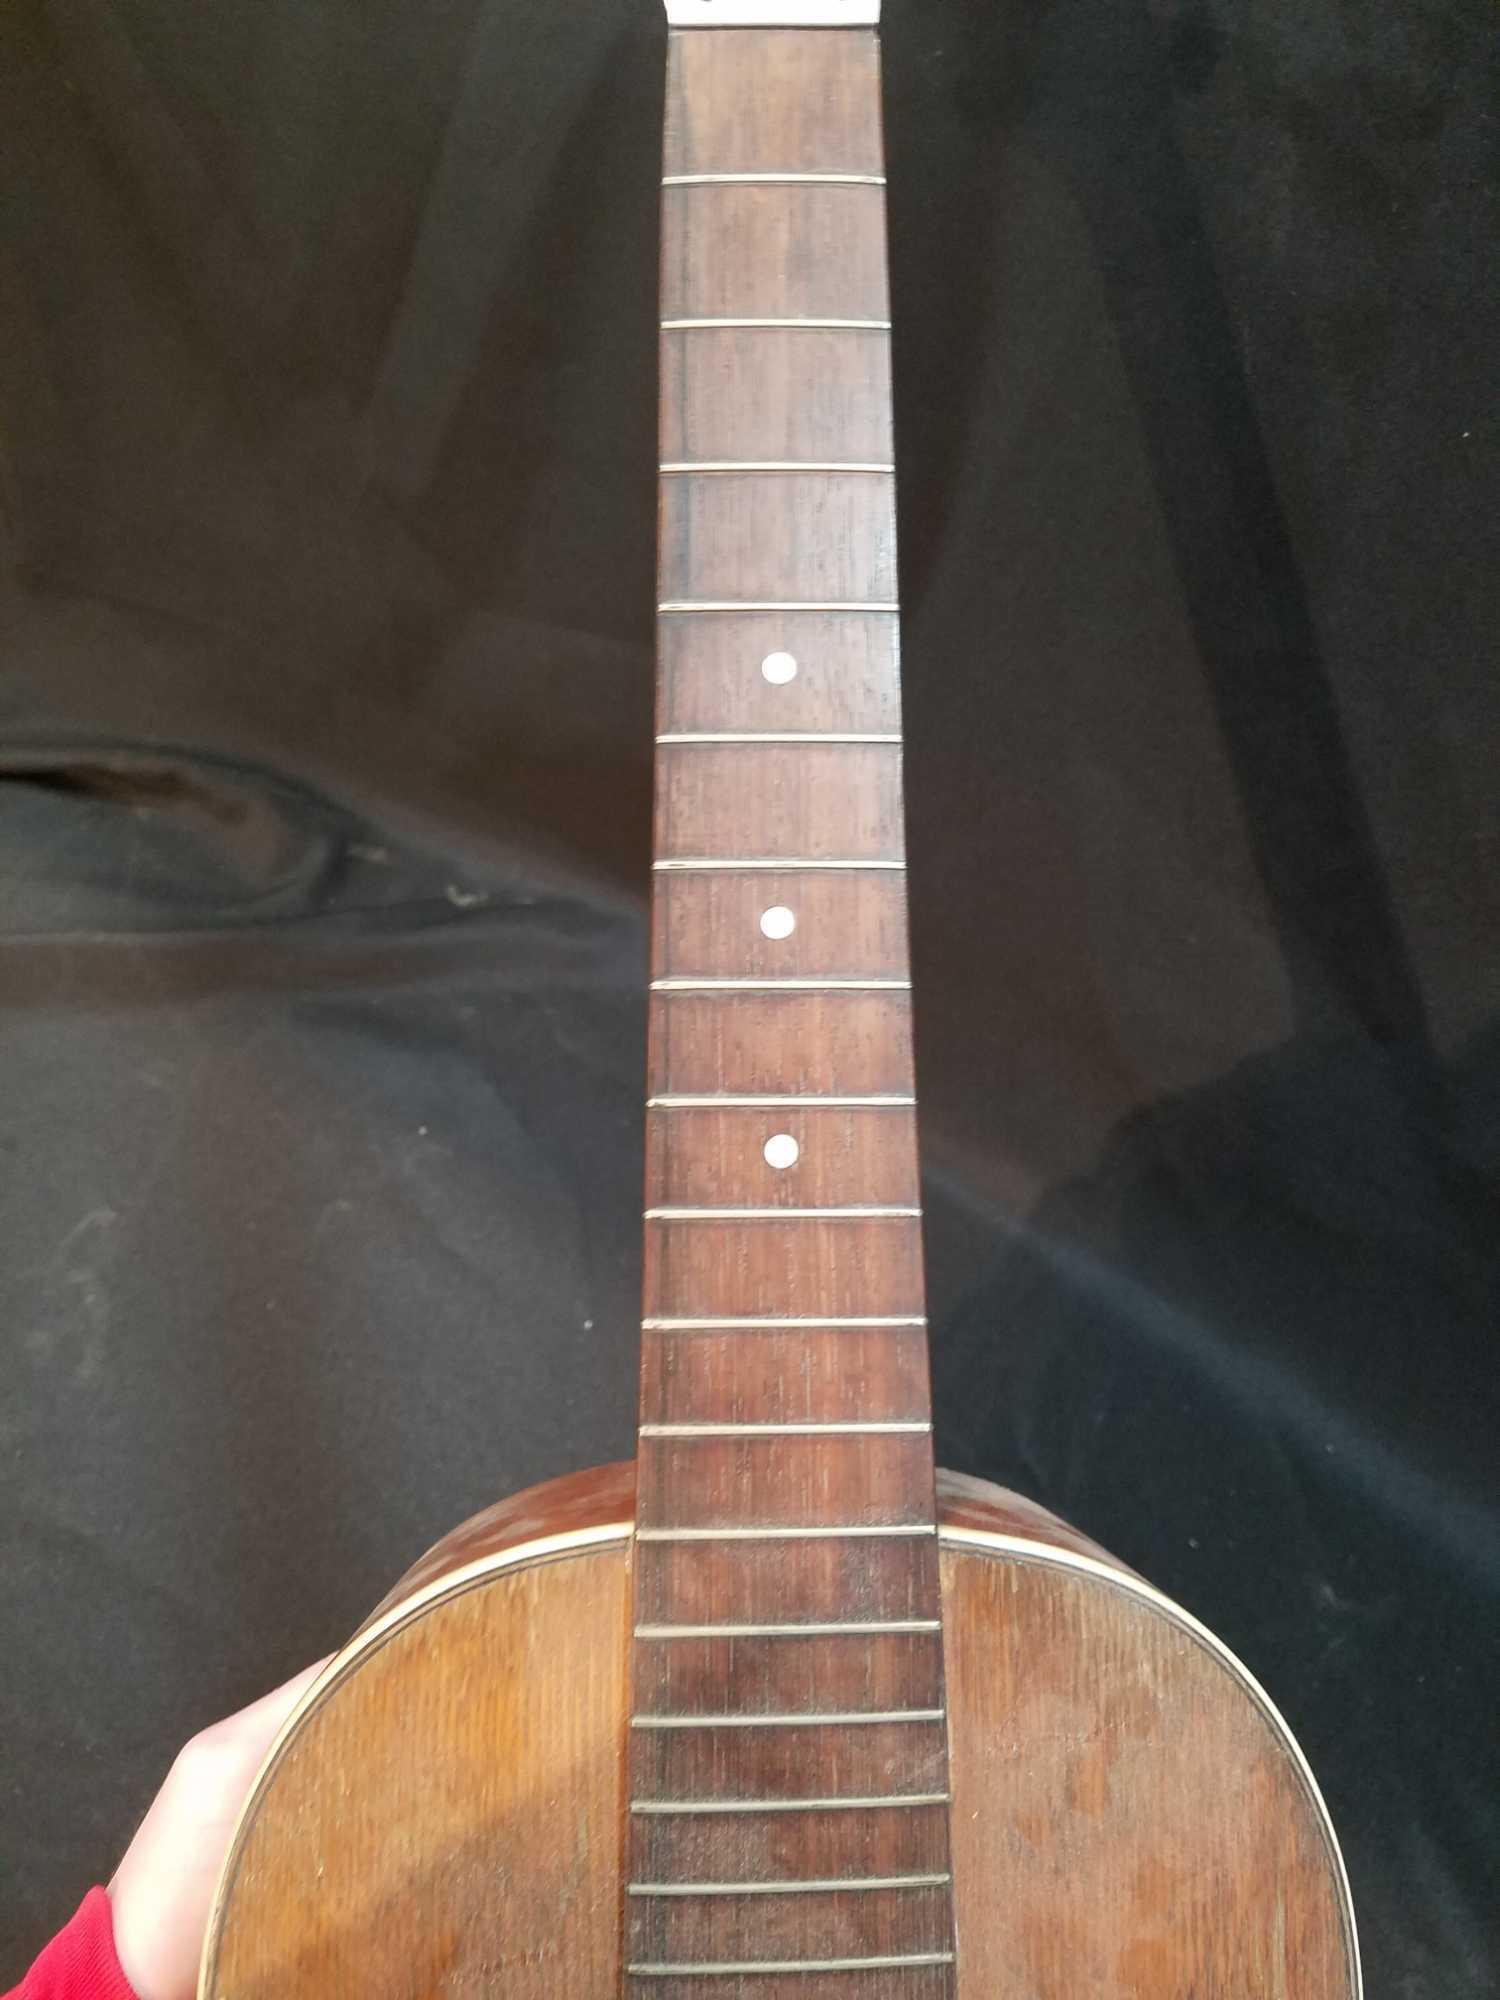 Late 1800s to early 1900s parlor guitar, missing strings, 36 inches long